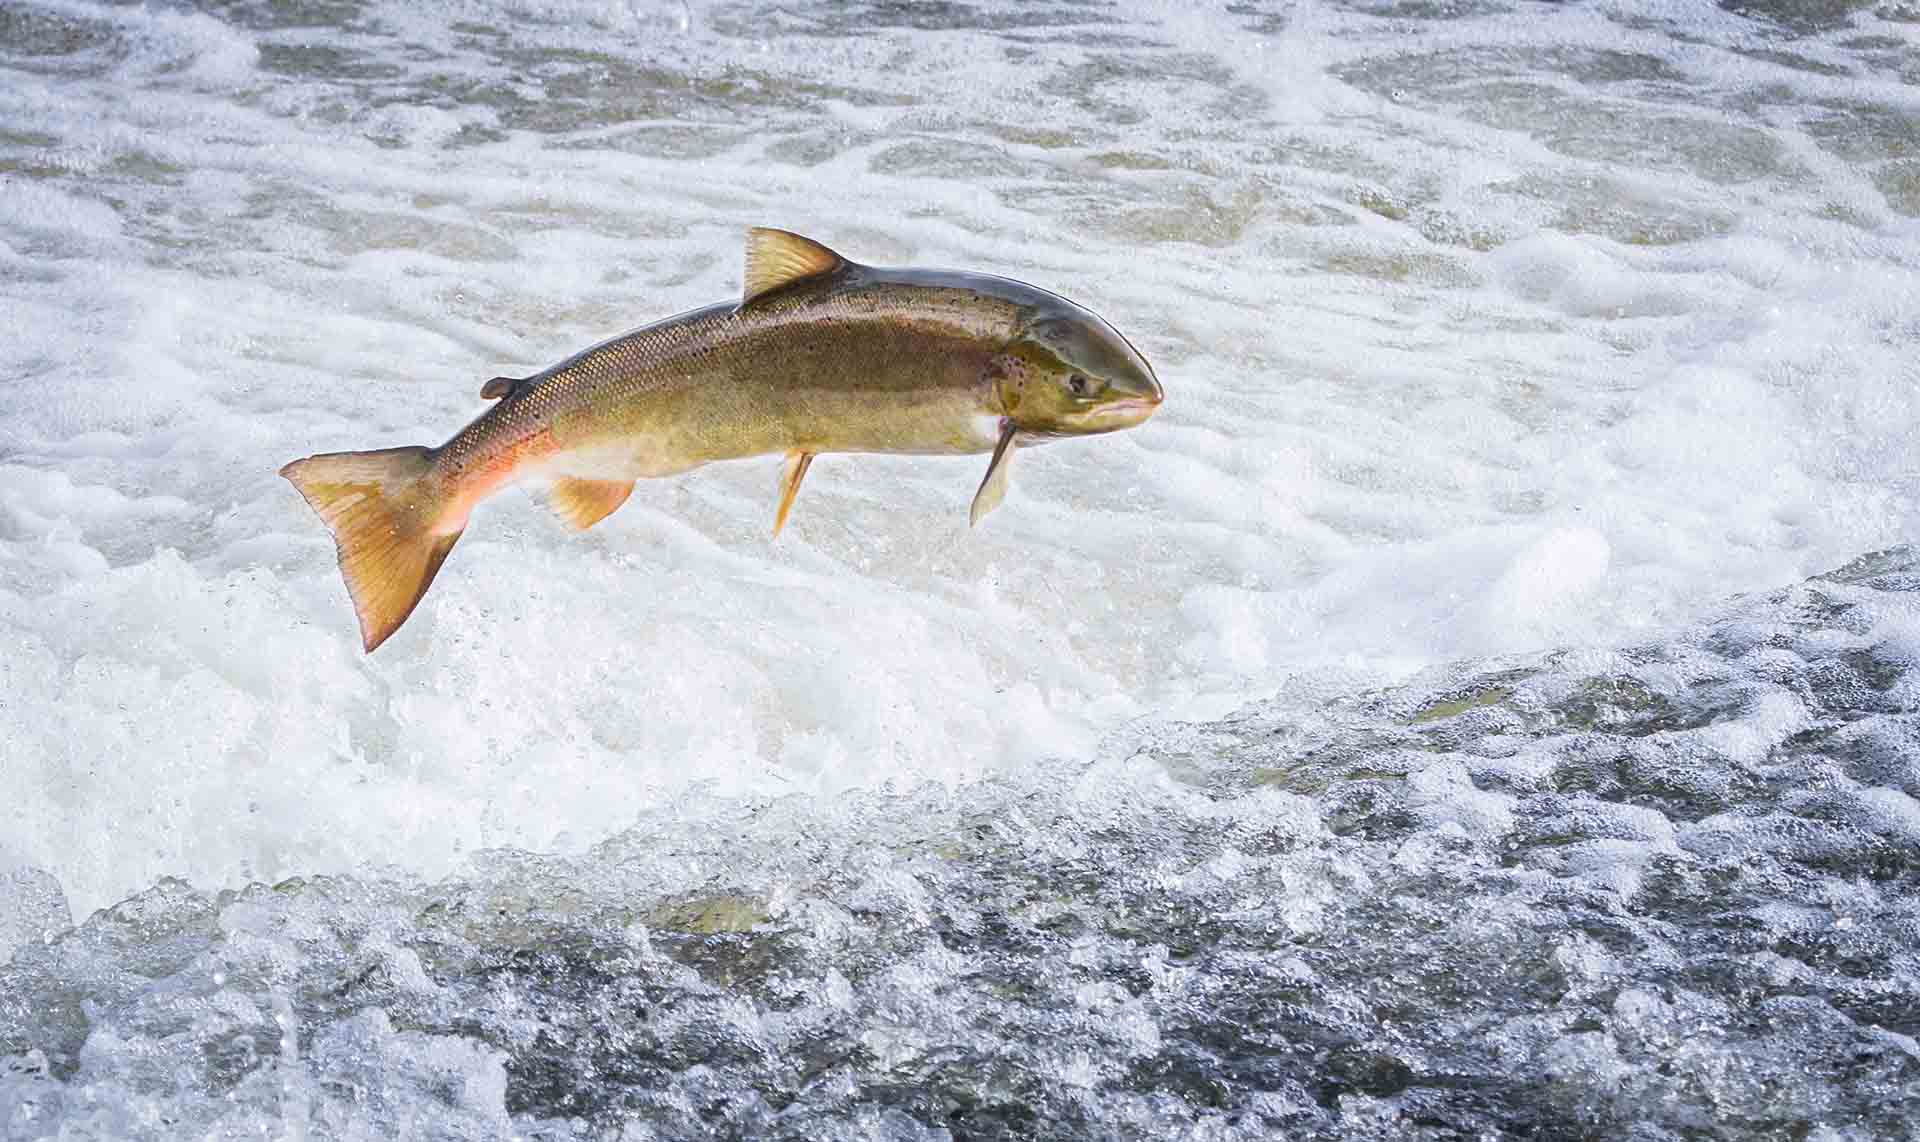 An Atlantic salmon jumps out of the water